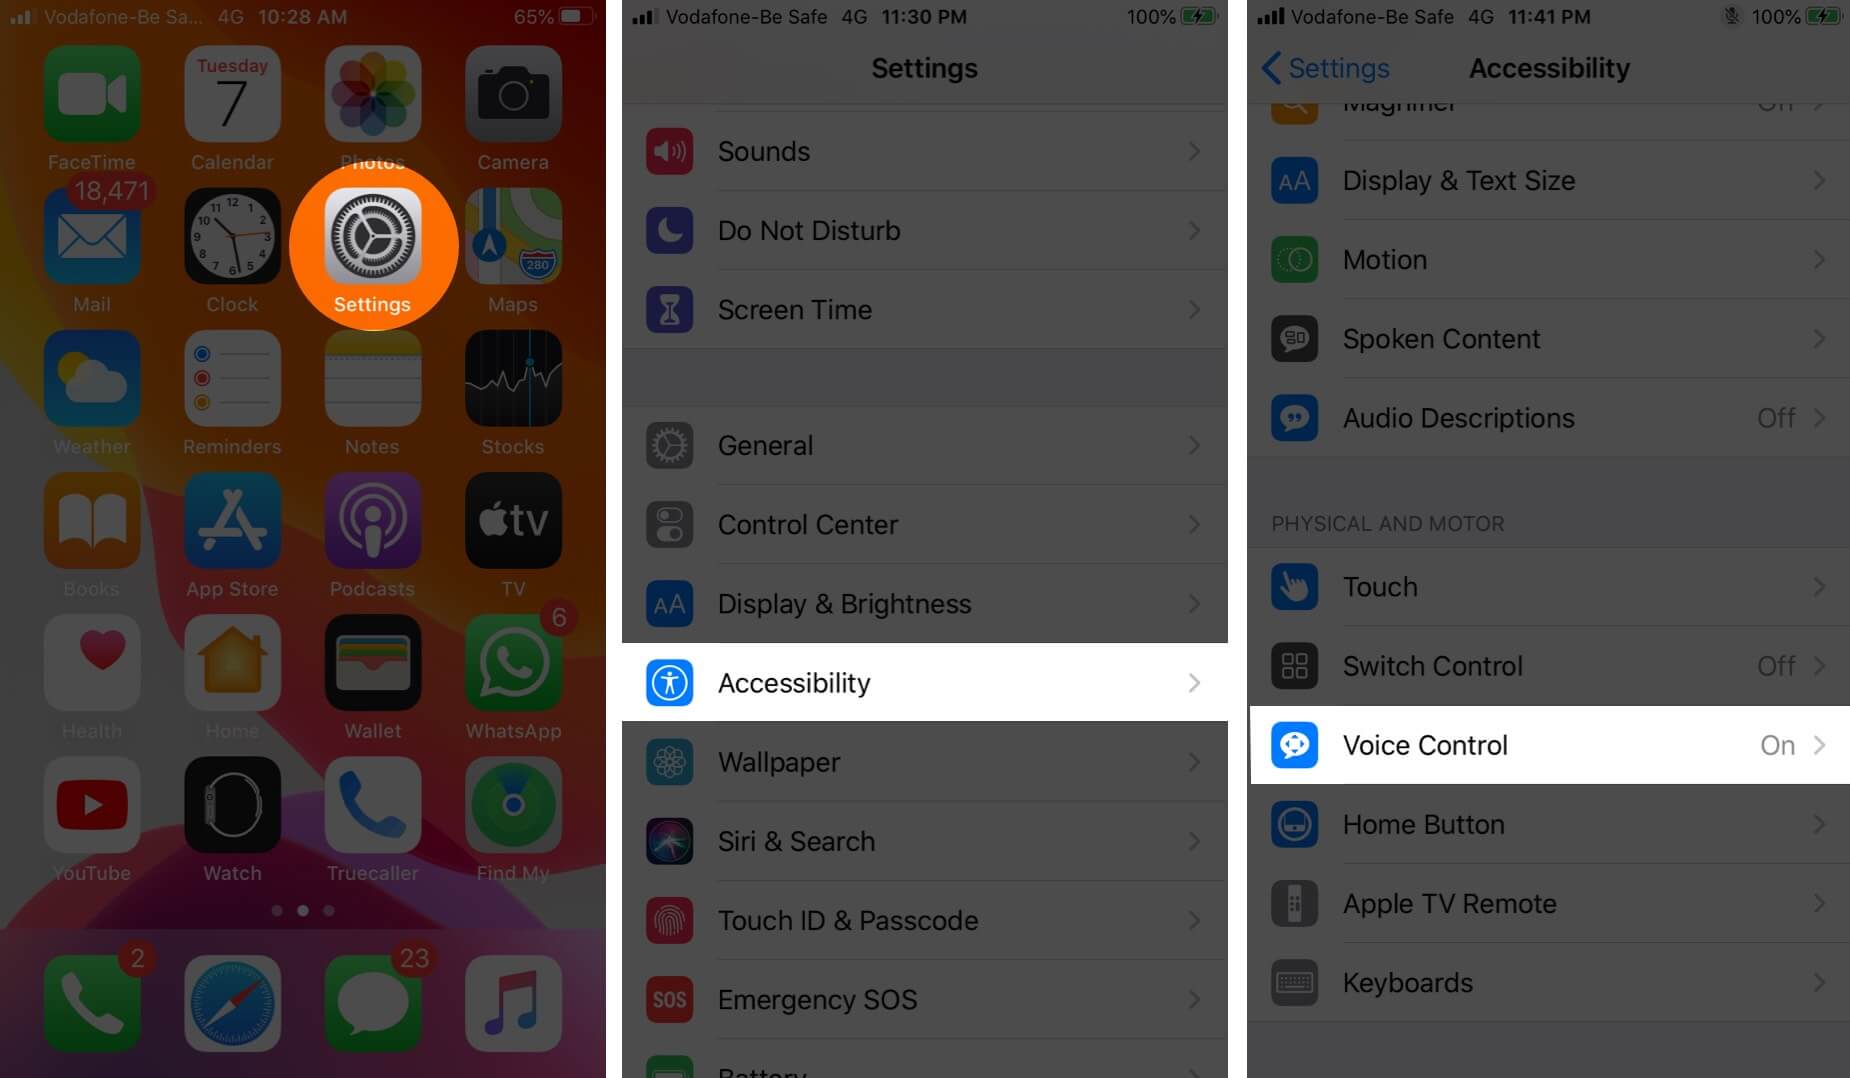 Open Settings Tap on Accessibility and Then Tap on Voice Control